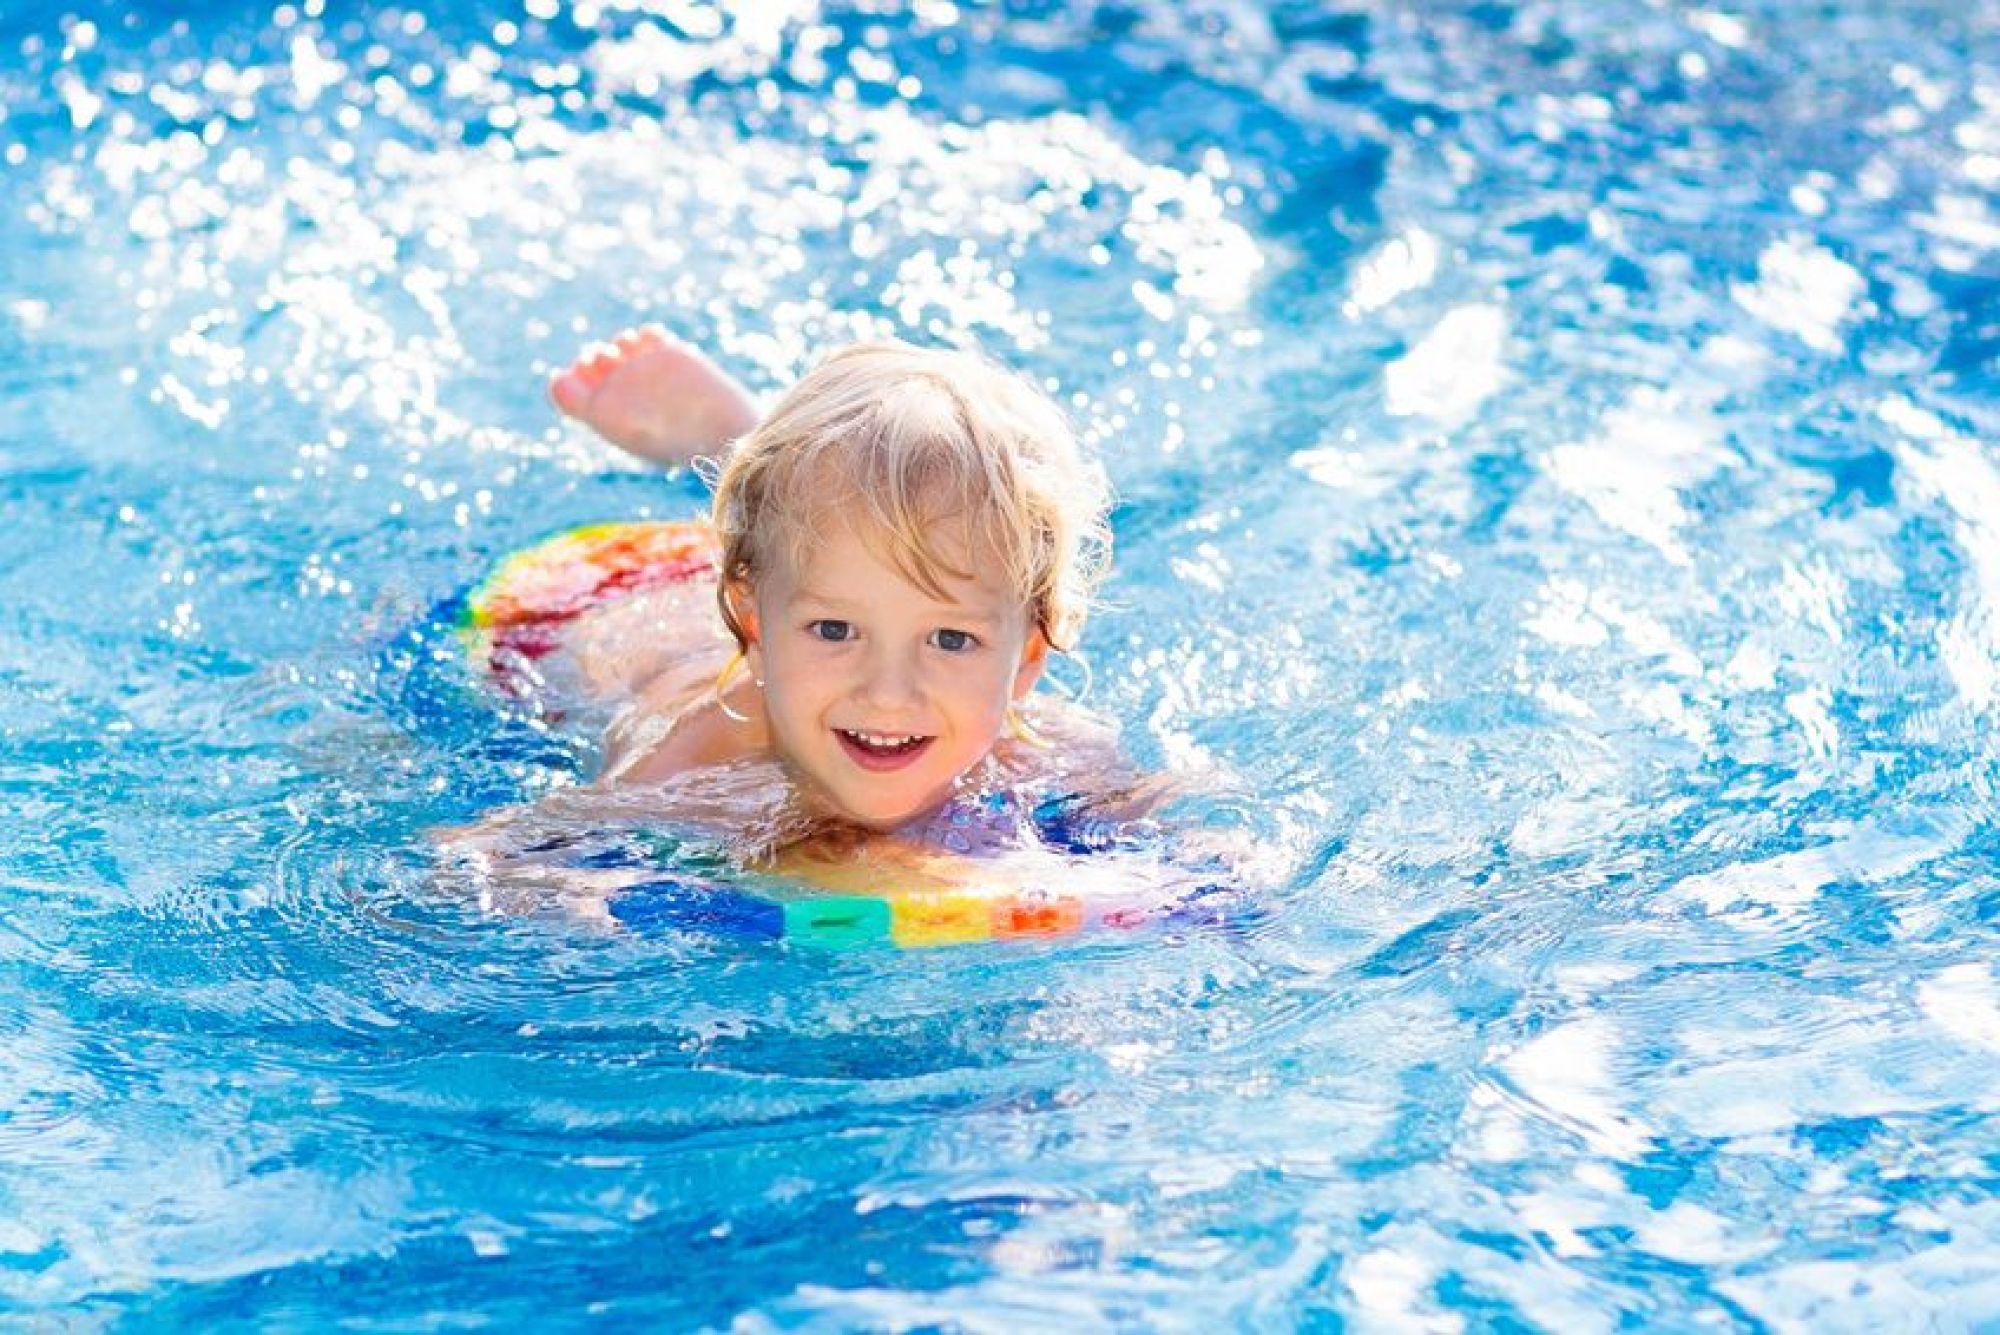 First Lap Learn to Swim Voucher Get $100 Off Swimming Lessons